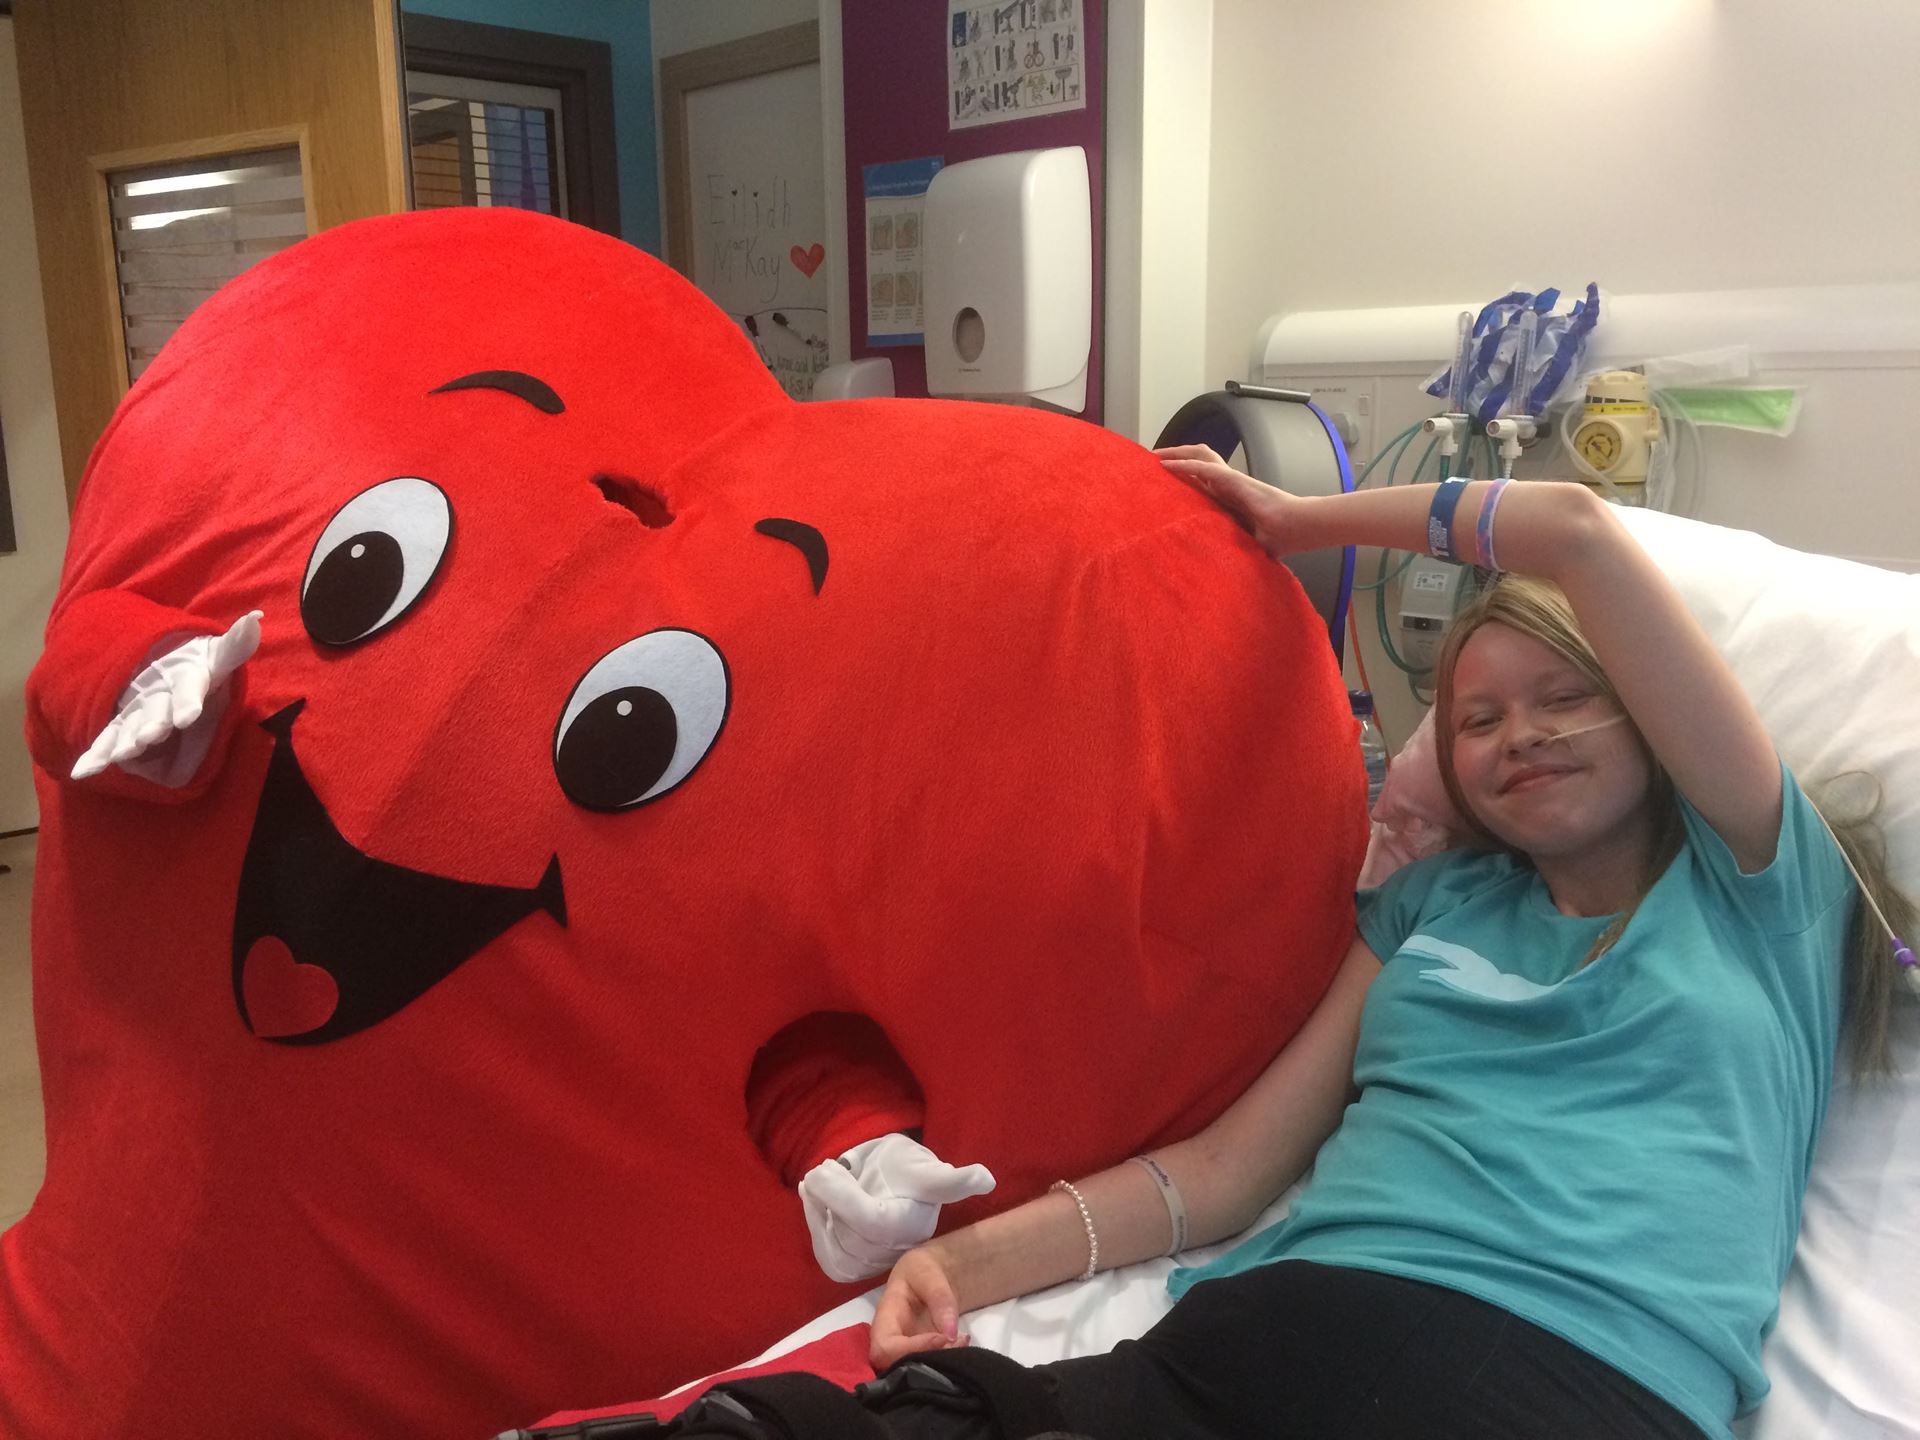 Eilidh in a hospital bed posing with a heart shaped mascot for Valentine's Day